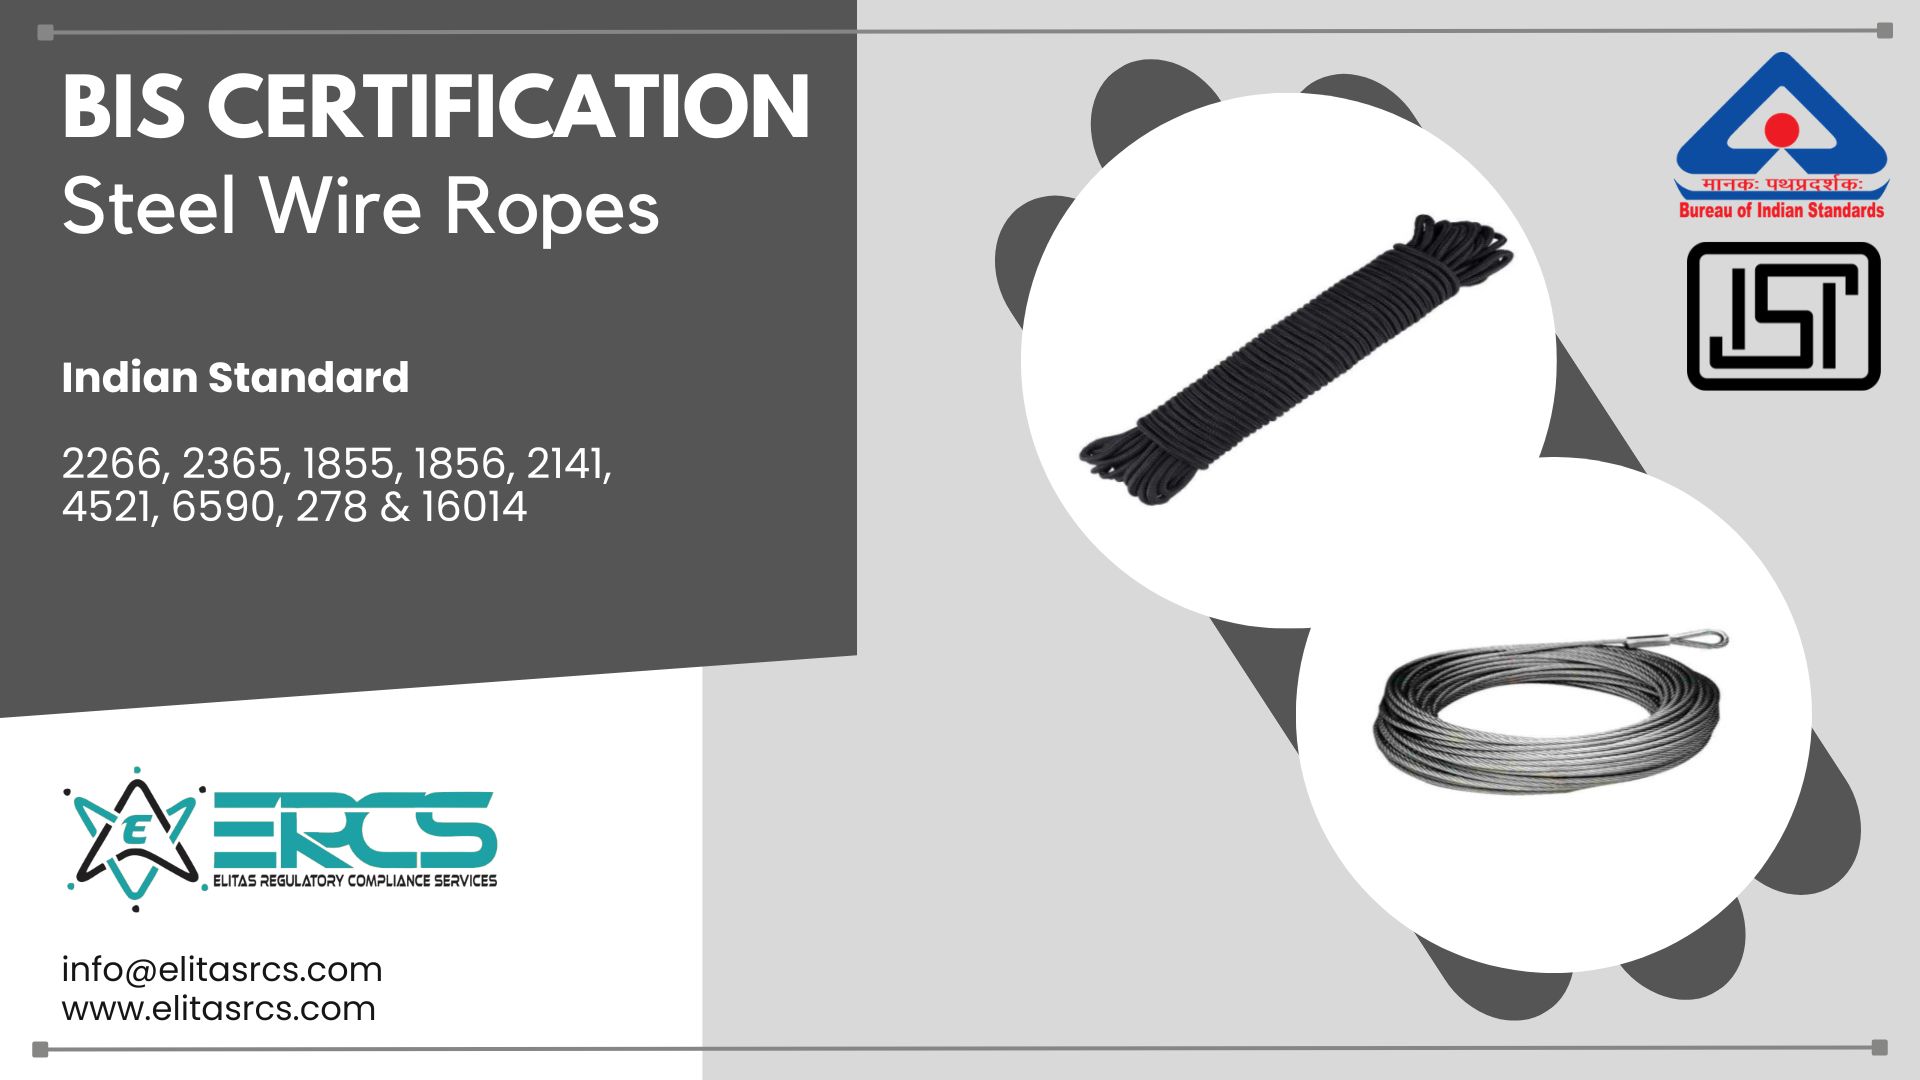 BIS Certification for Steel Wire Ropes